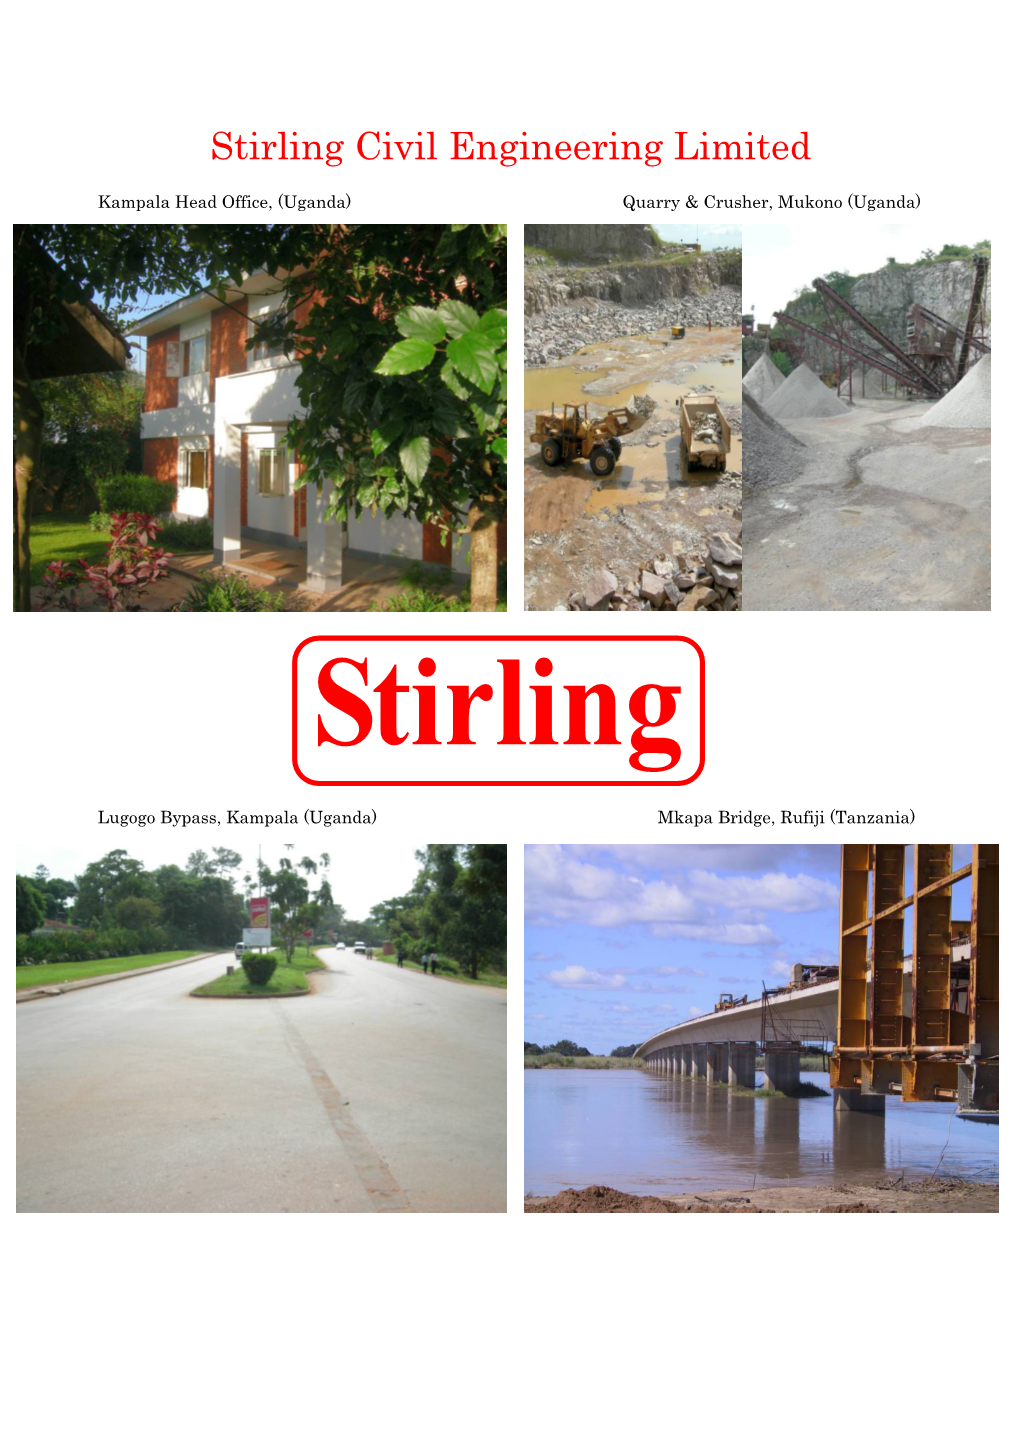 Stirling Civil Engineering Limited